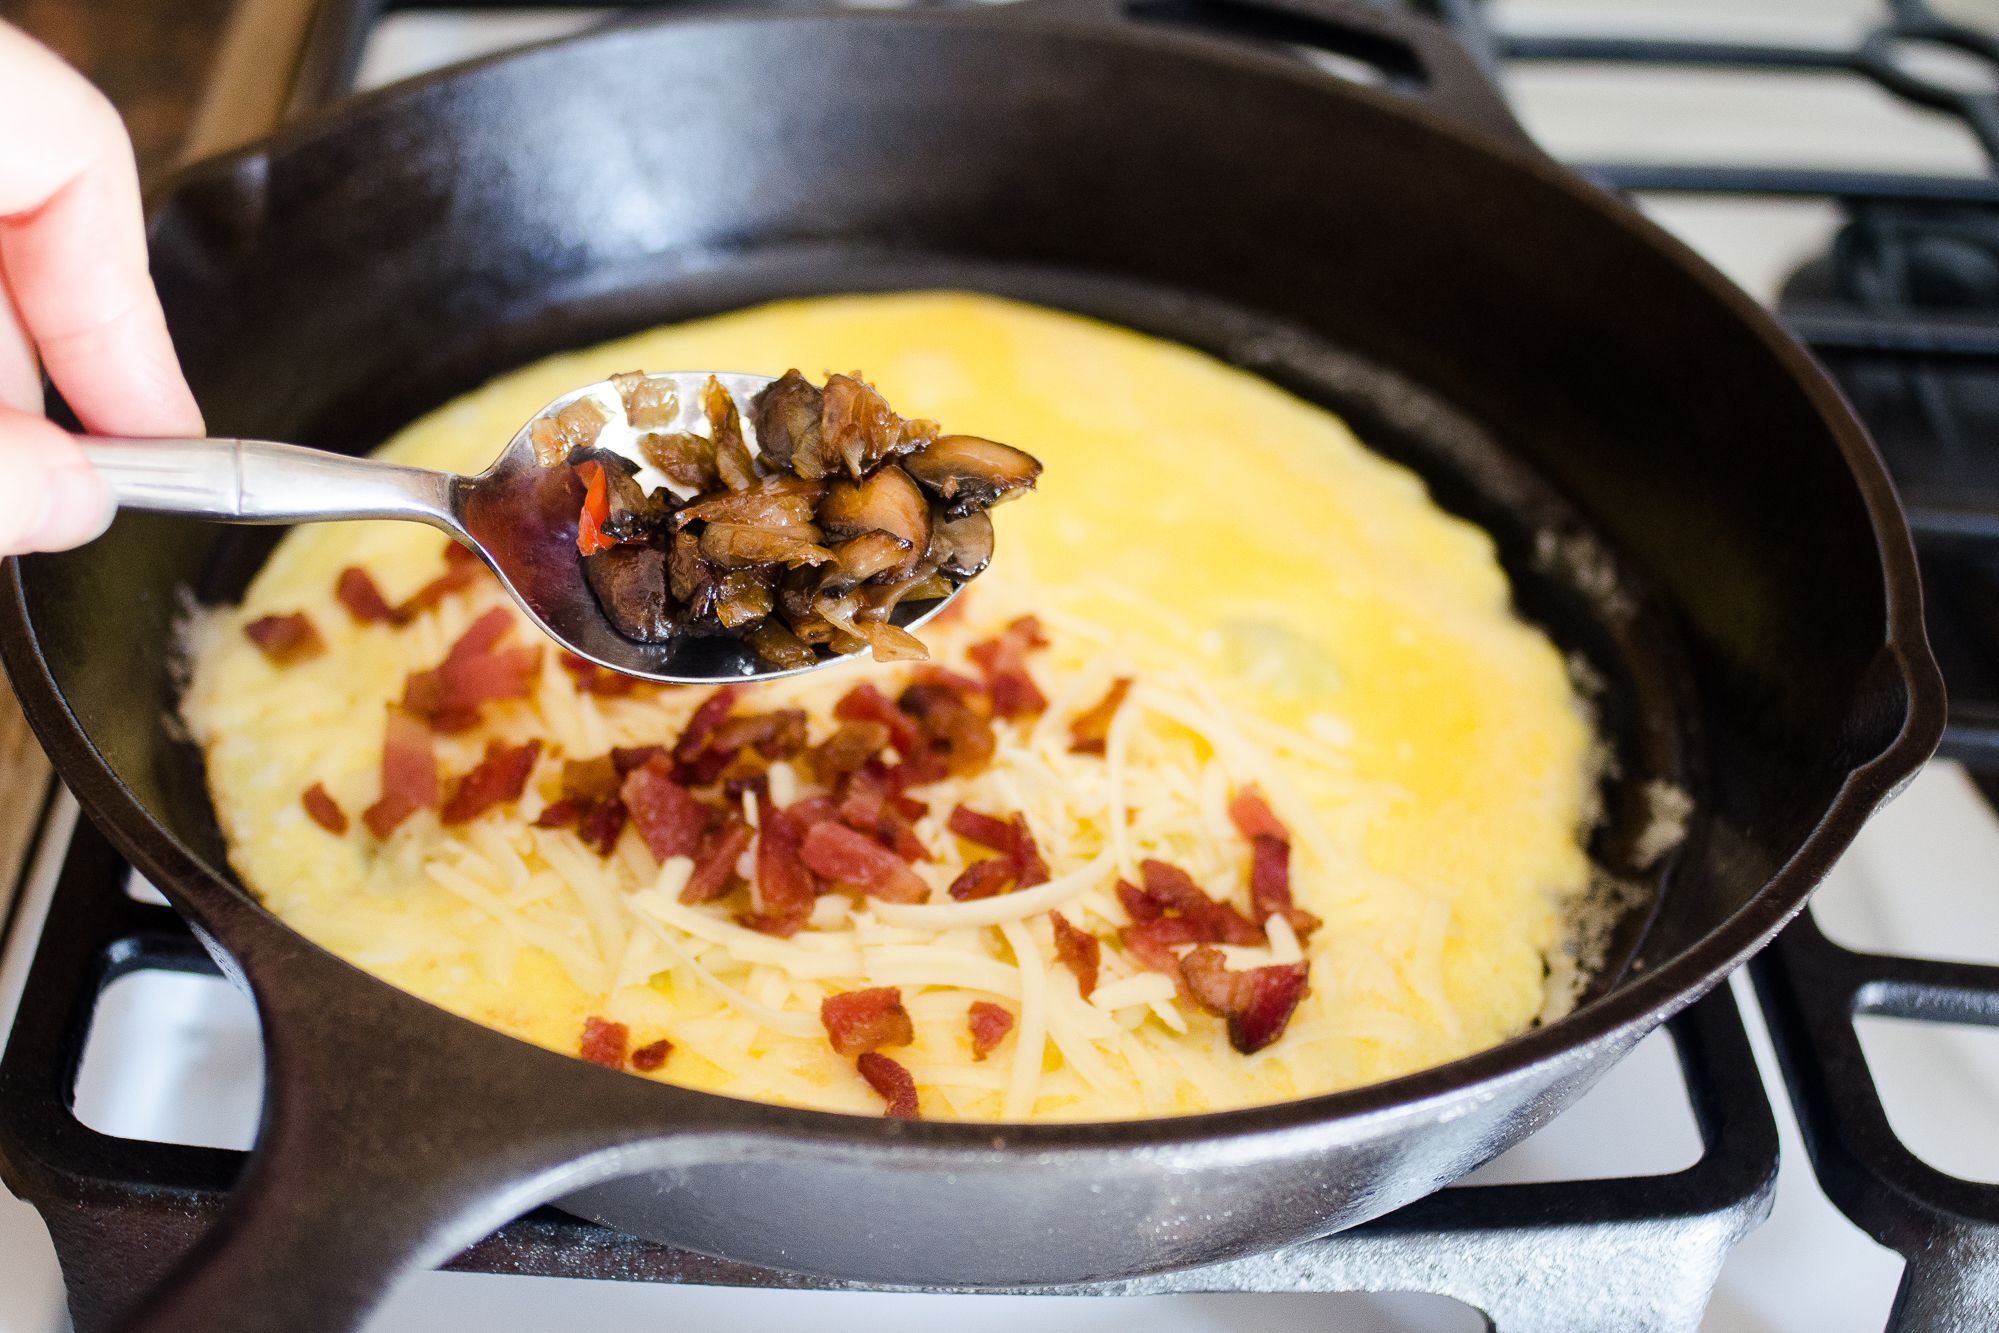 https://hips.hearstapps.com/thepioneerwoman/wp-content/uploads/2016/10/how-to-make-an-omelette-10.jpg